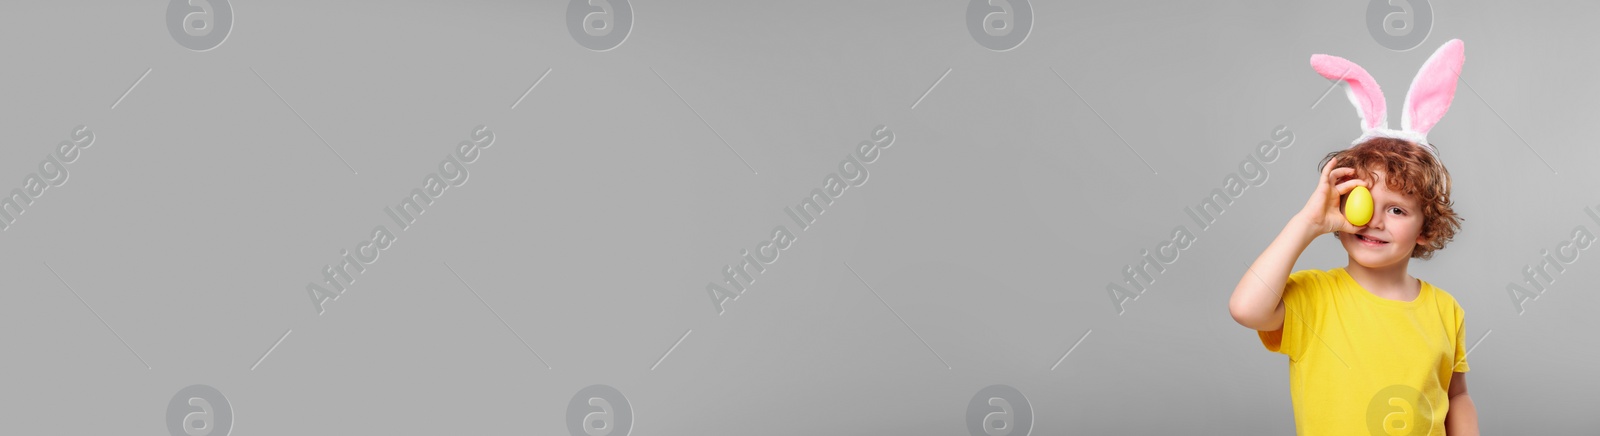 Image of Happy boy with bunny ears holding Easter egg near eye on light grey background. Banner design